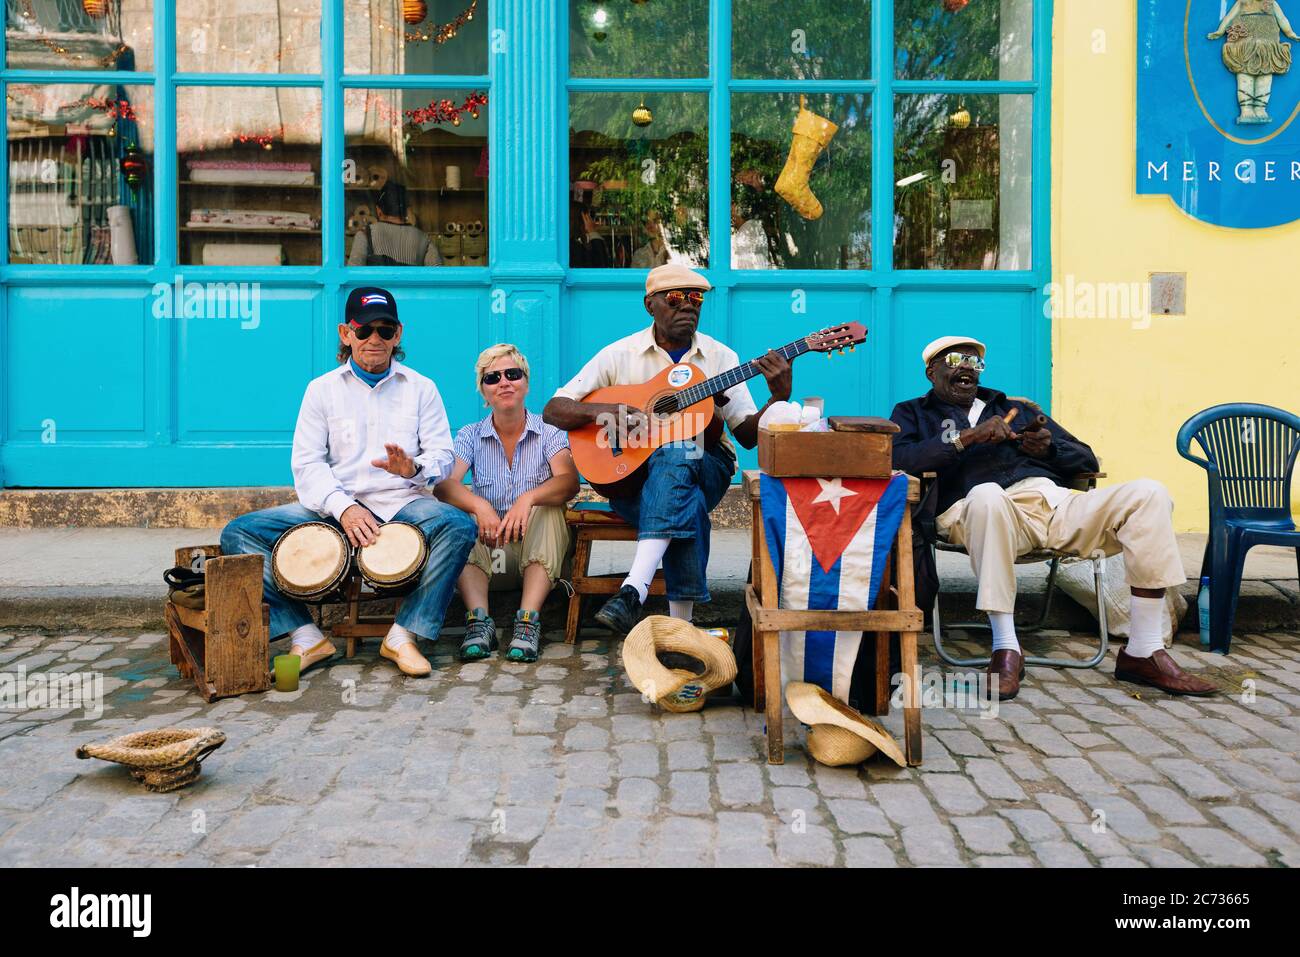 Band playing traditional cuban music in Old Havana Stock Photo